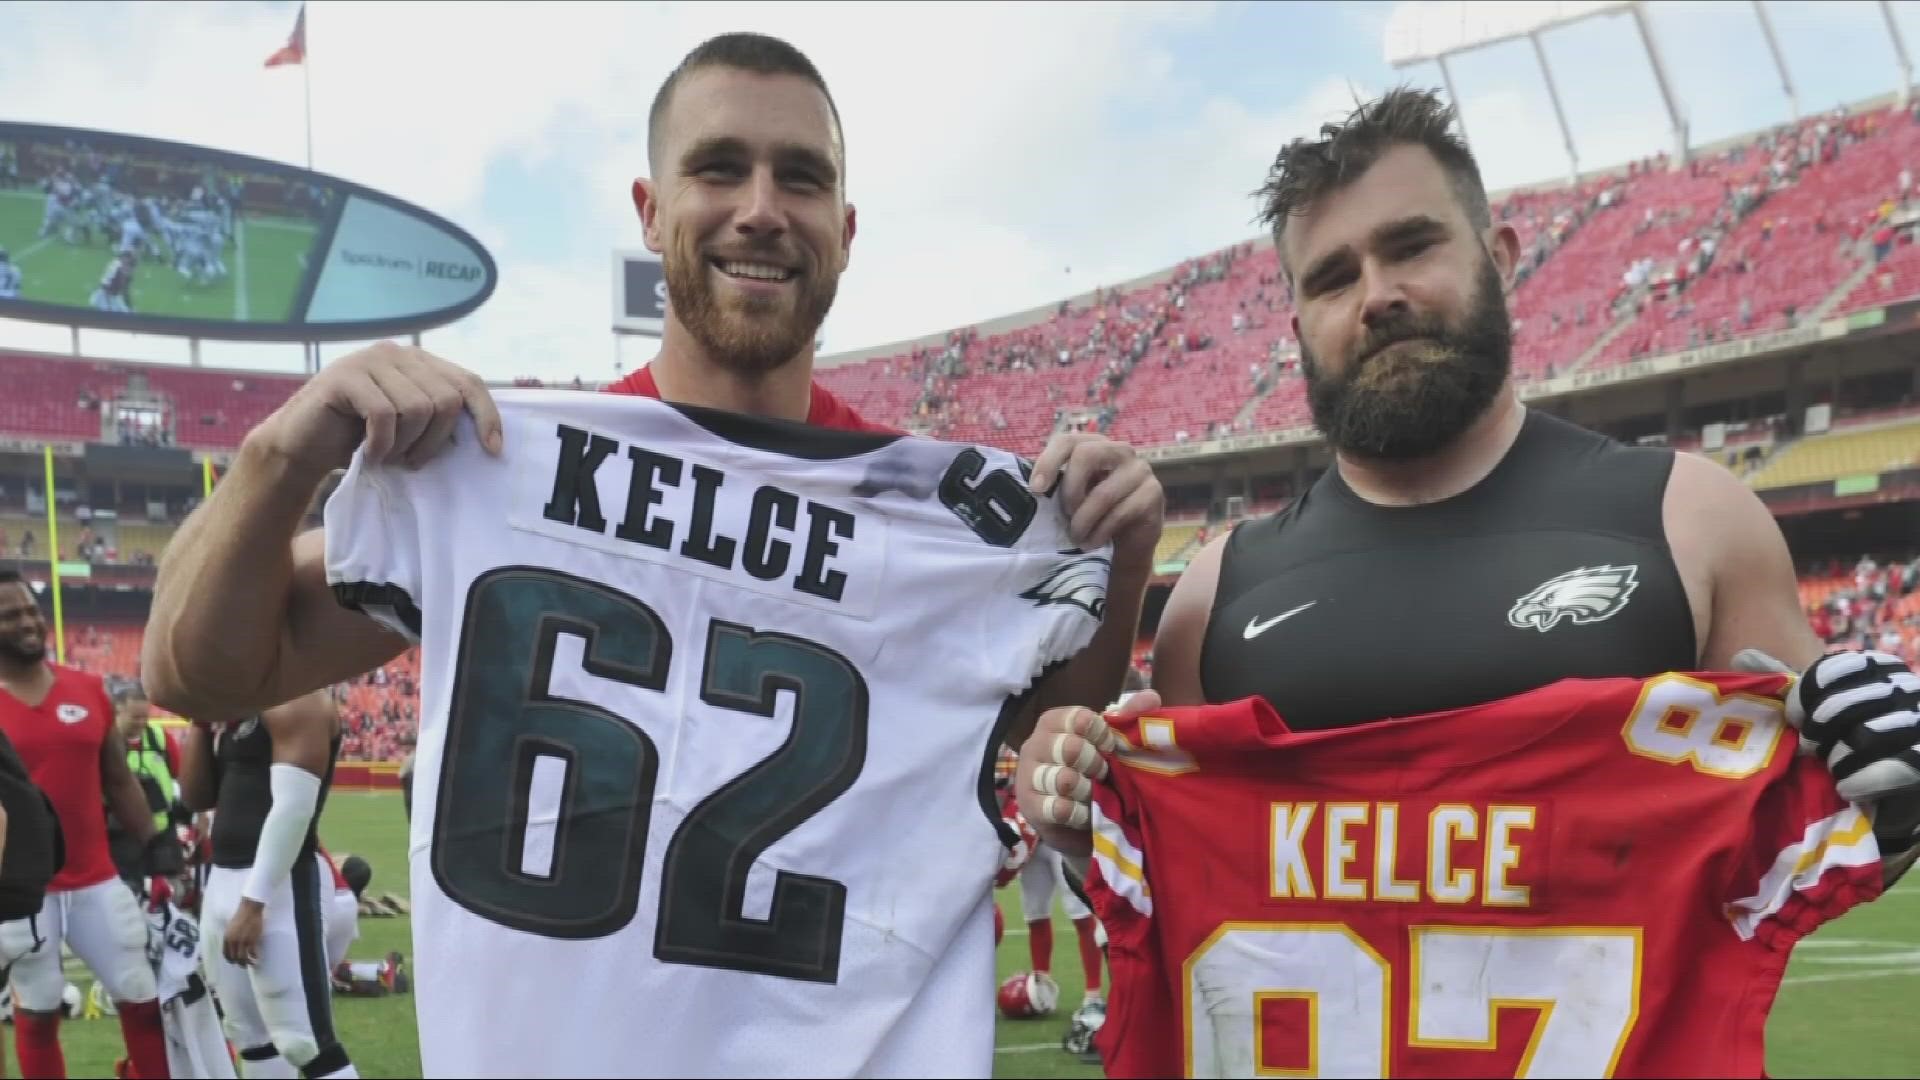 'It’s going to be an amazing feeling playing against him,' Travis Kelce said.